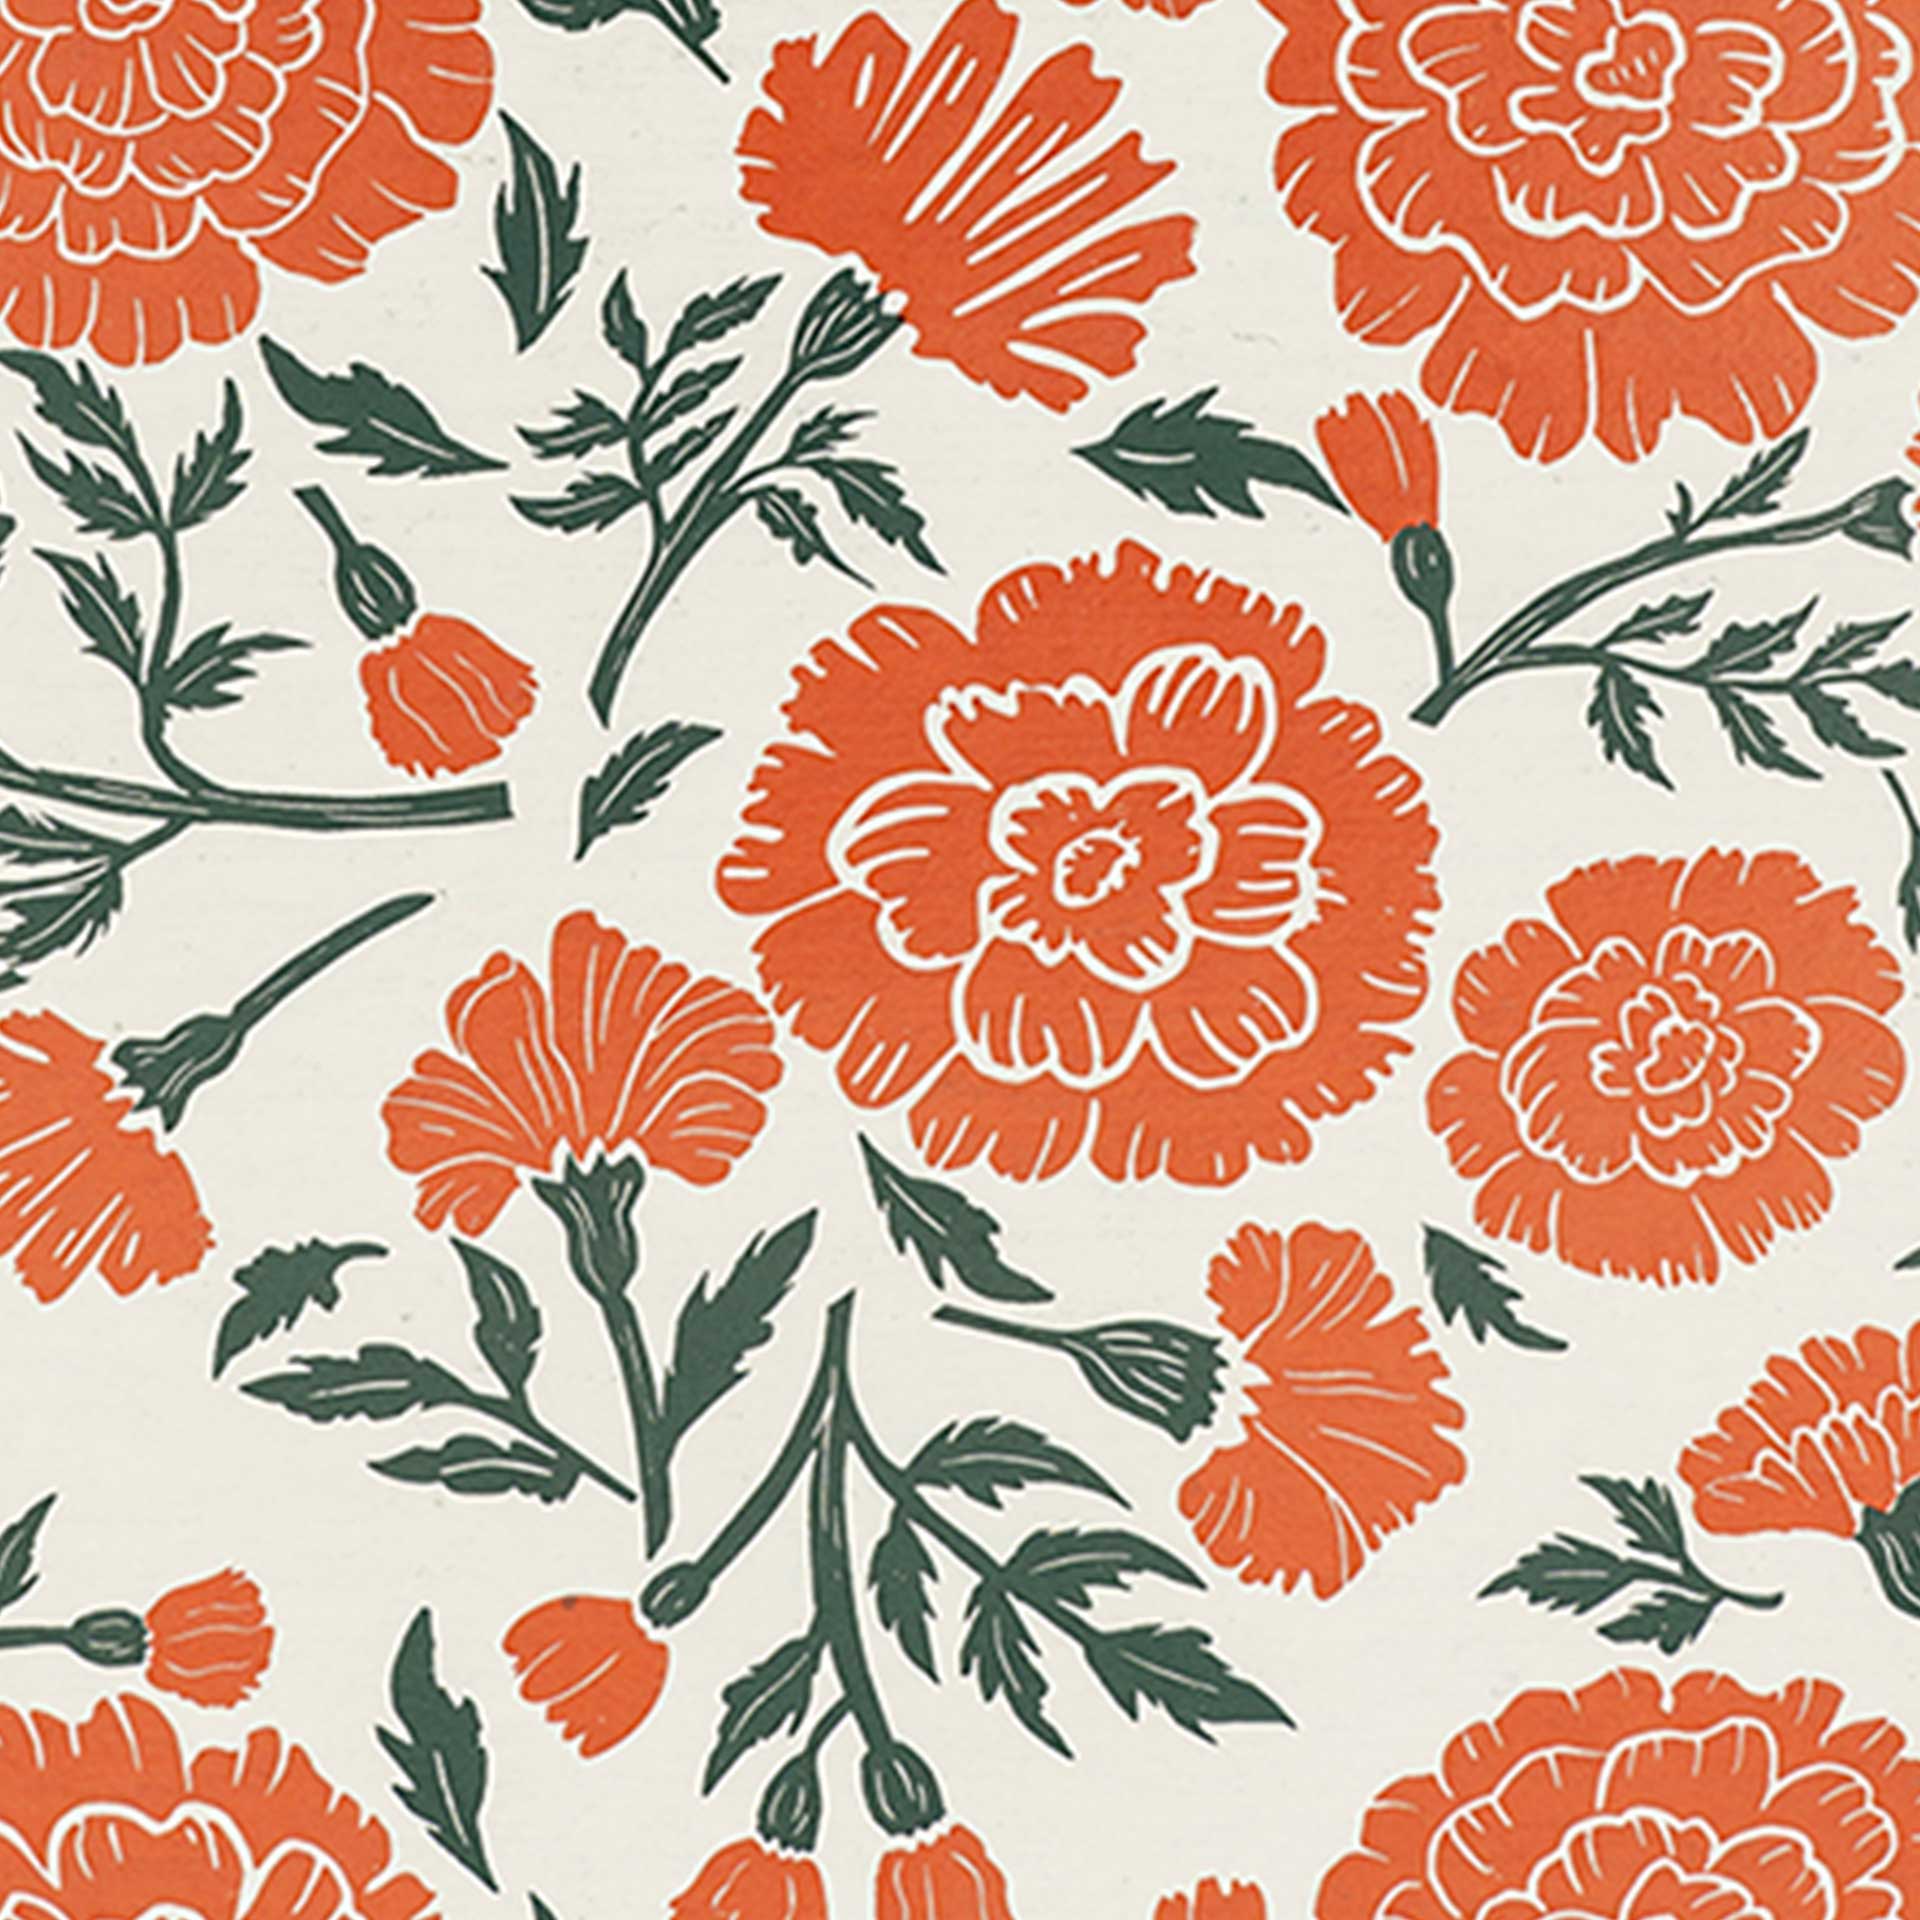 Closeup of large flowers printed in orange and green